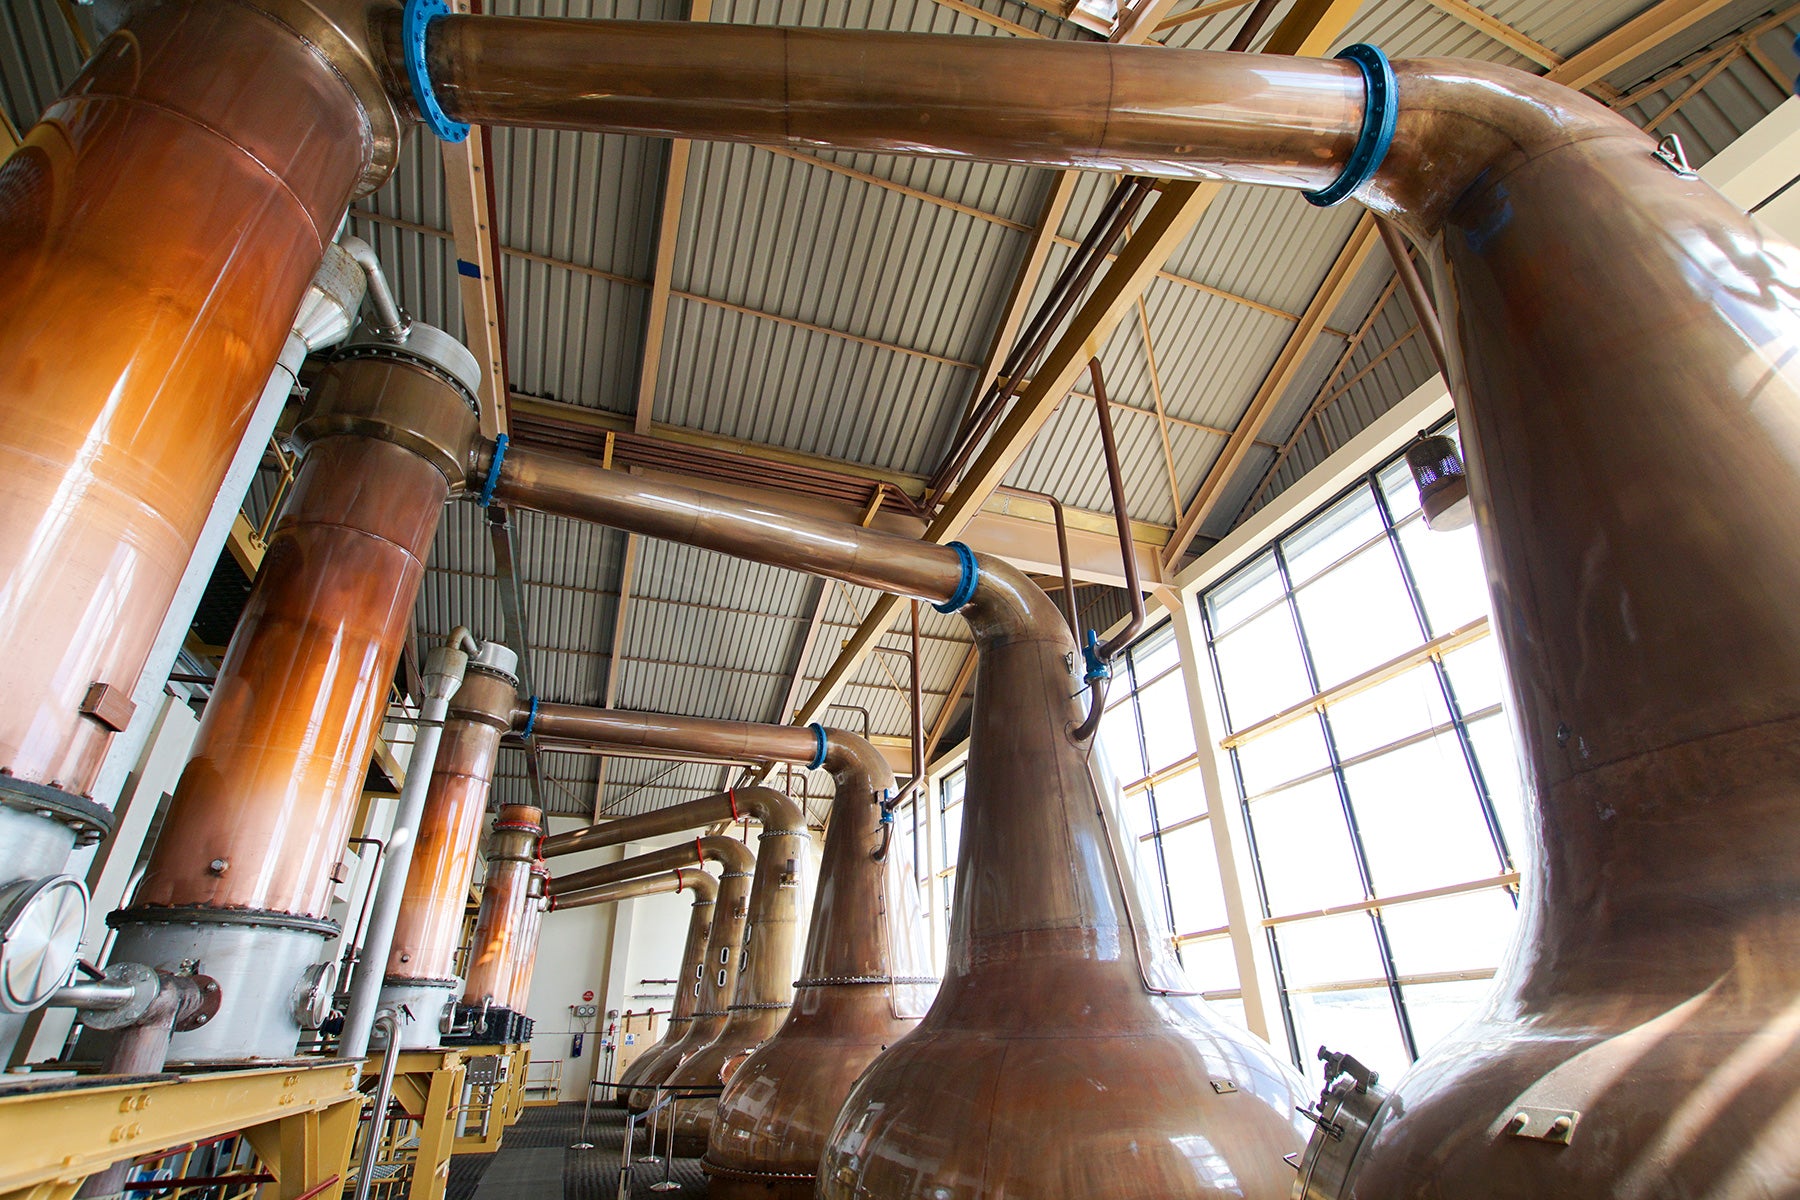 How is Scotch whisky made?